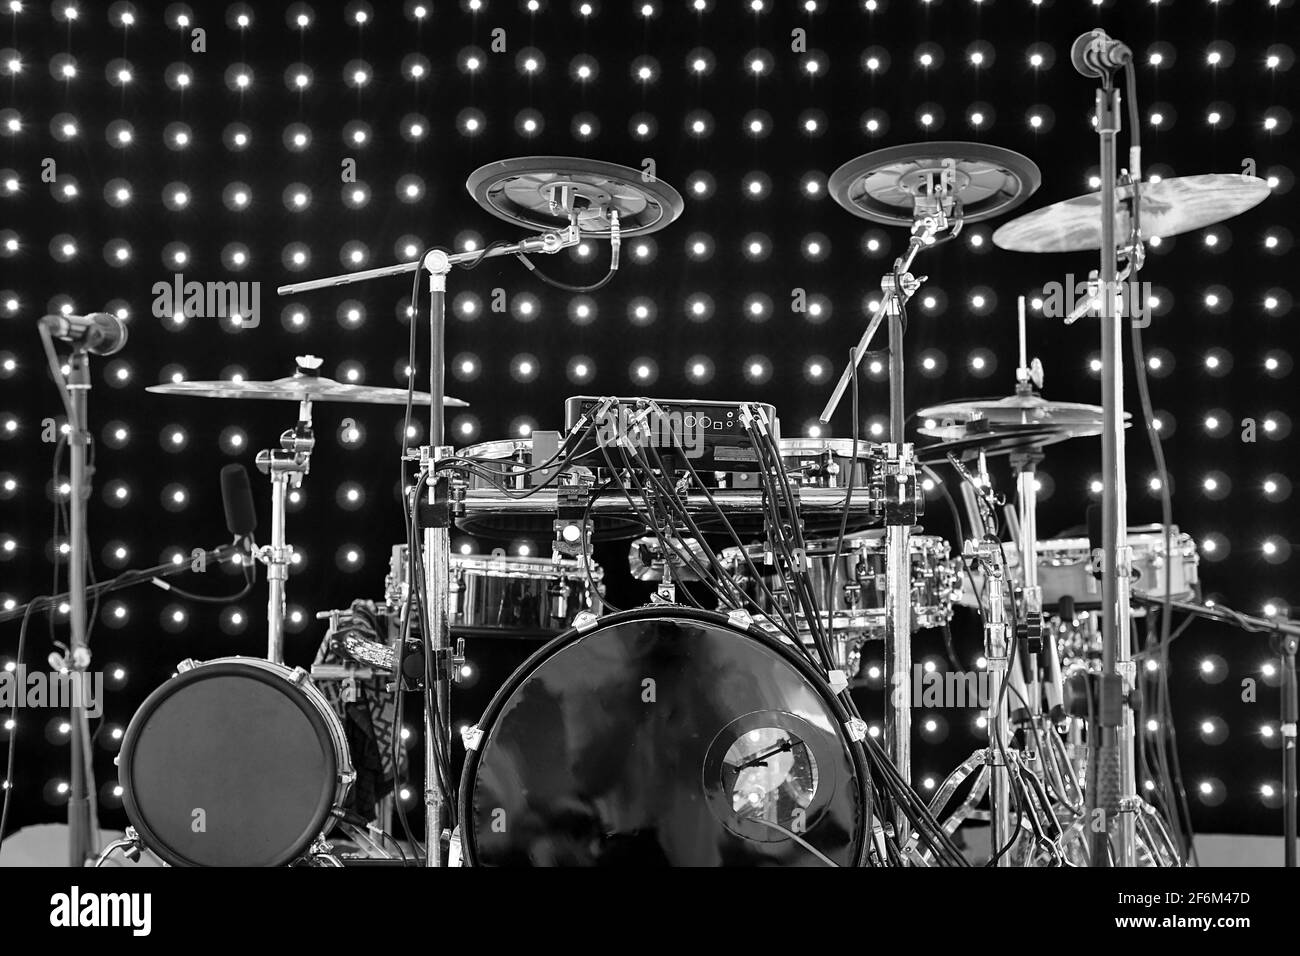 Drum kit with different types of drums on the stage with lights on the  background in black and white Stock Photo - Alamy